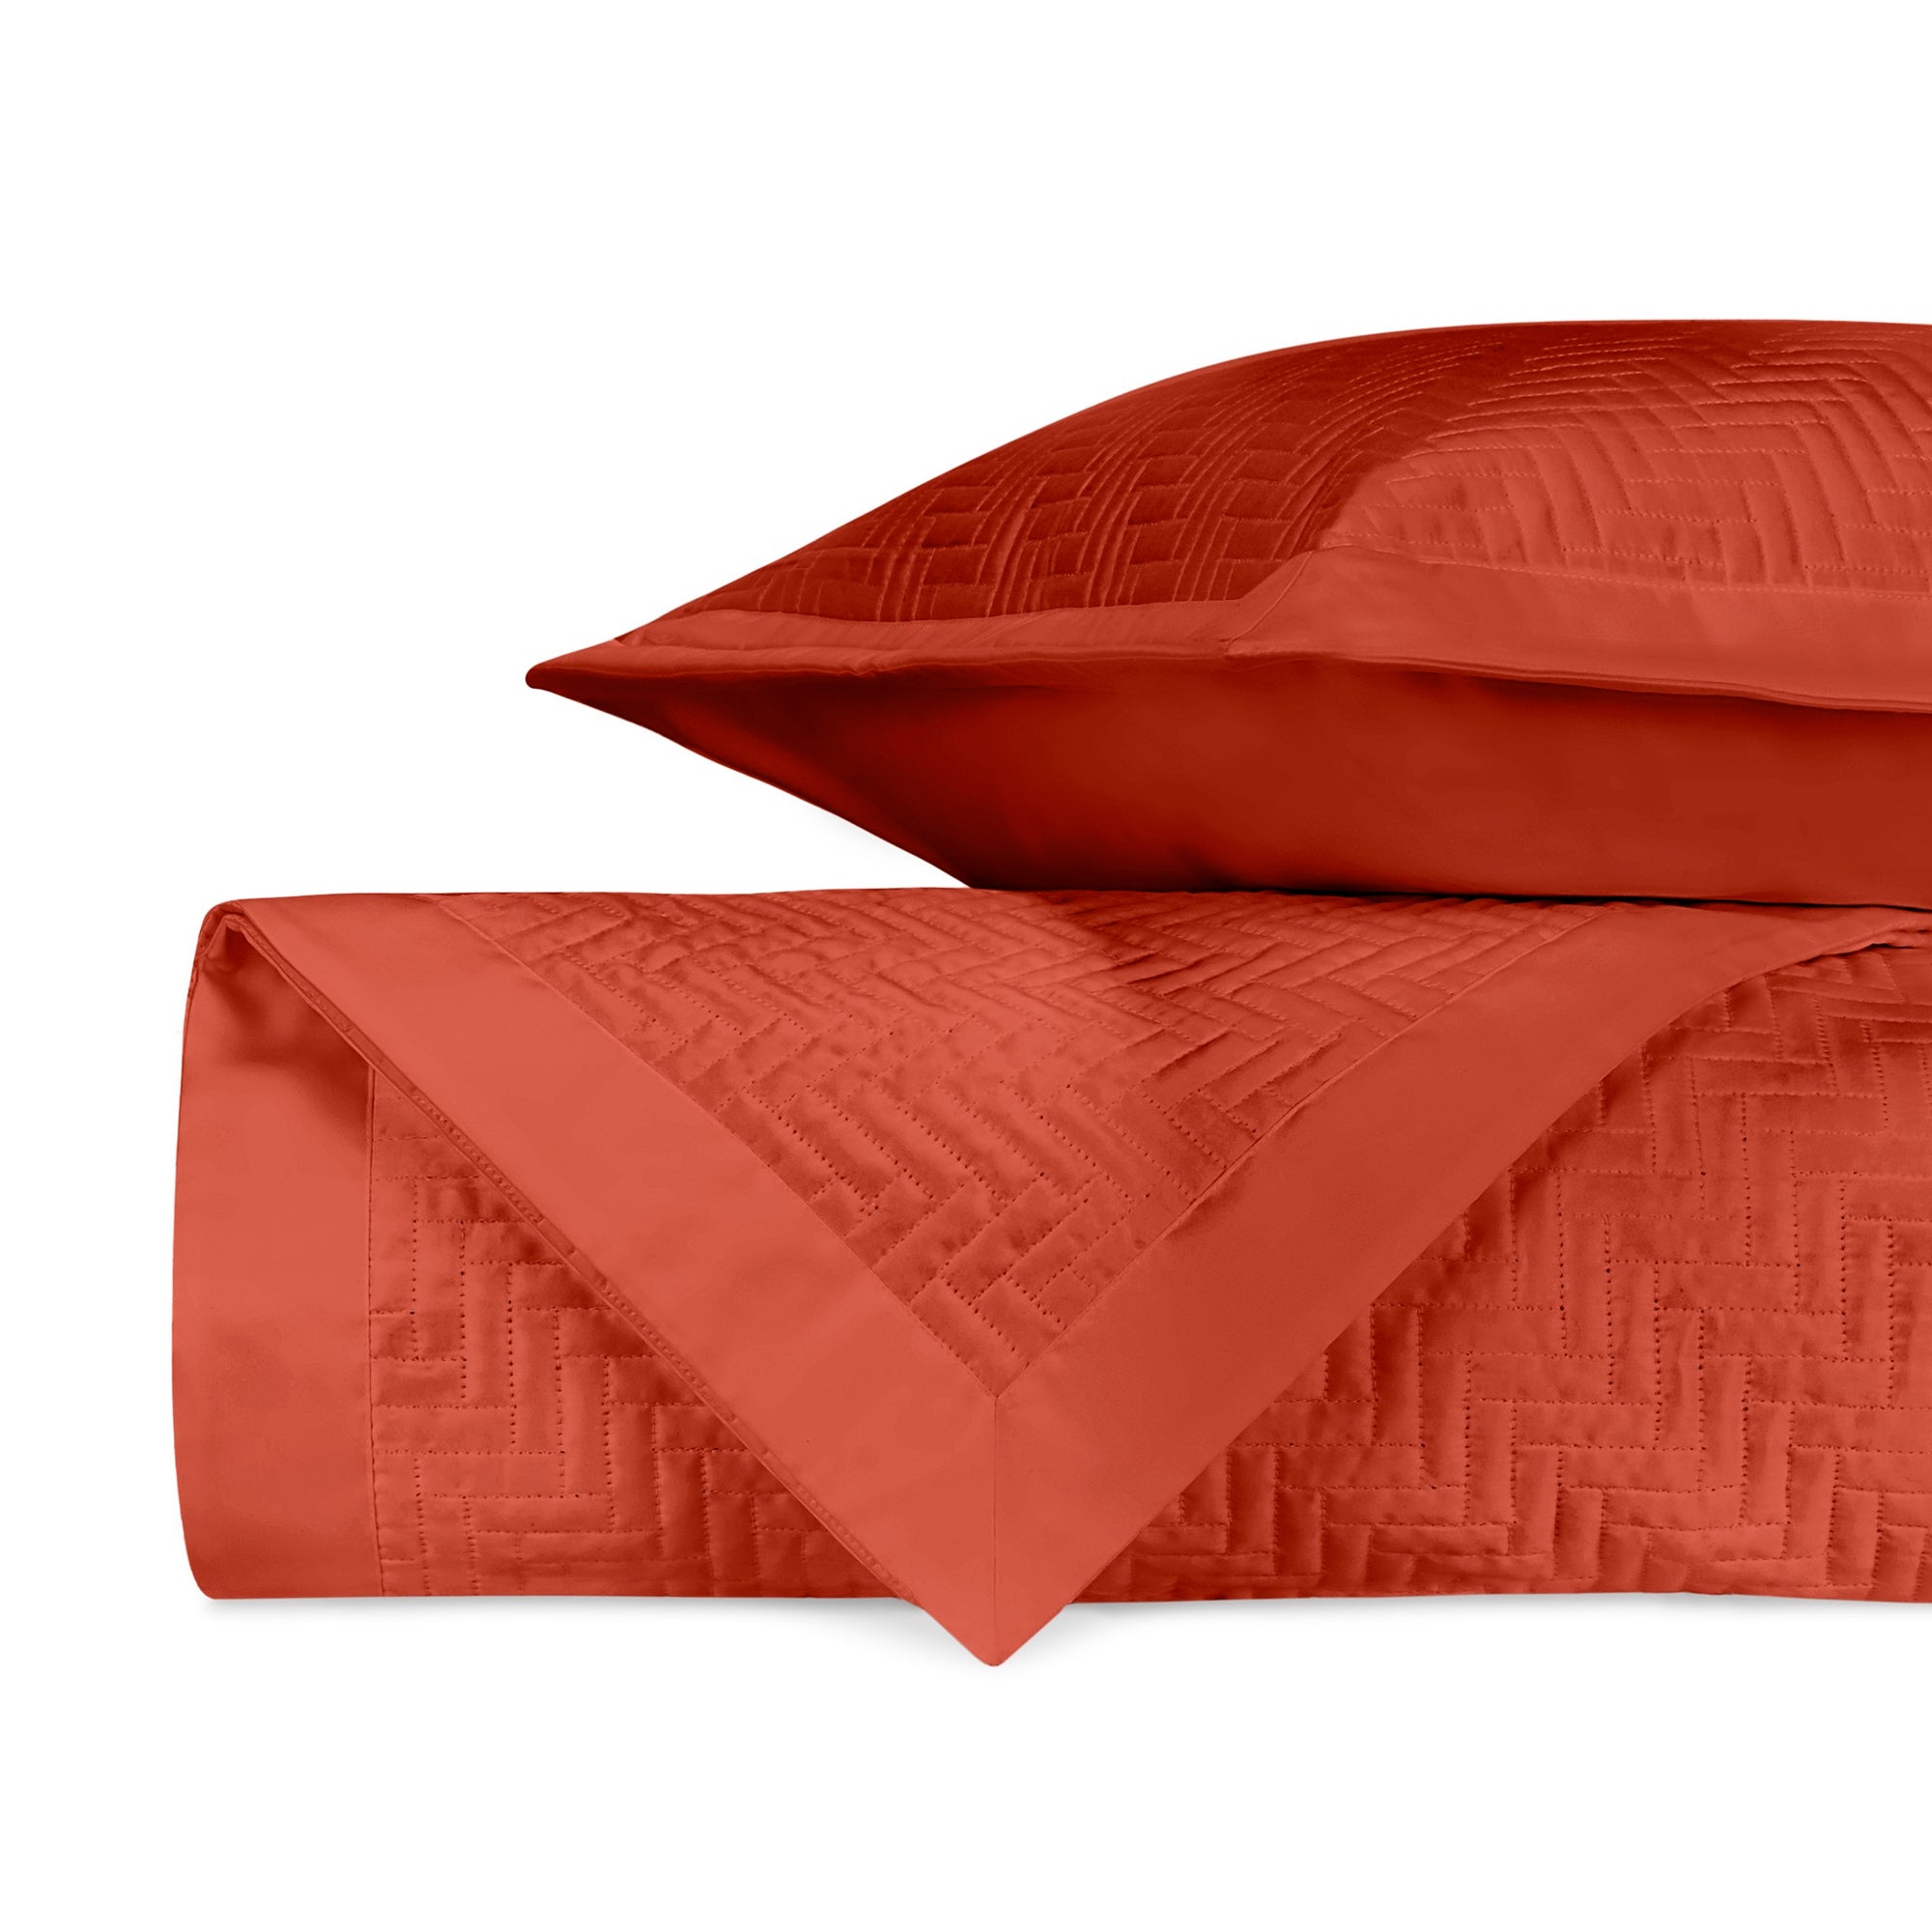 Stack Image of Home Treasures Baxter Royal Sateen Quilted Bedding in Color Lobster